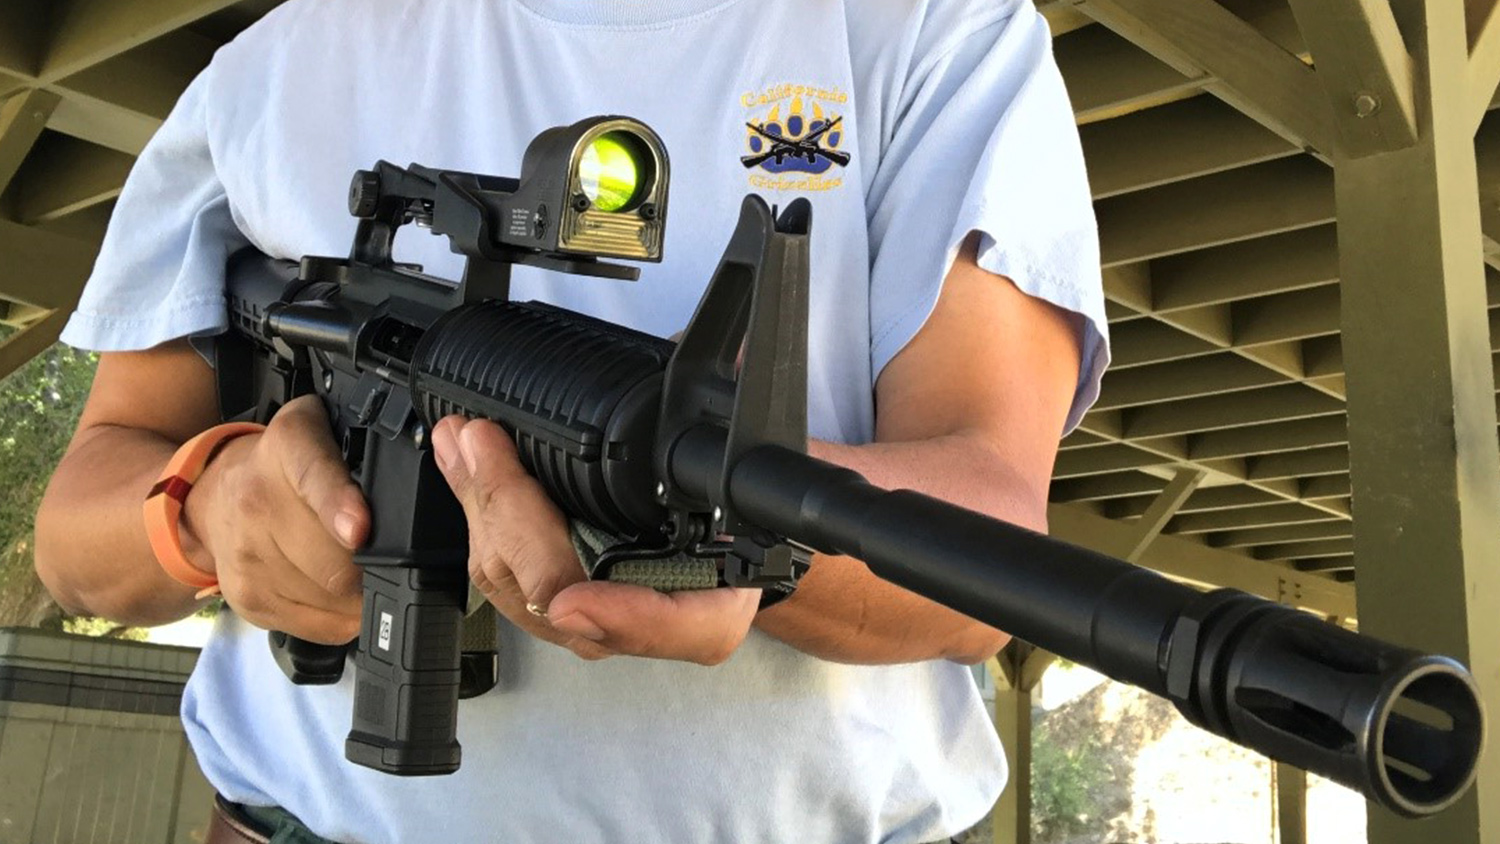 The plain vanilla 16-inch barreled AR-15 is the most common variant of the “modern sporting rifle” in the country. This versatile firearm is capable of cleaning a target (all 10s or better) when shot well.